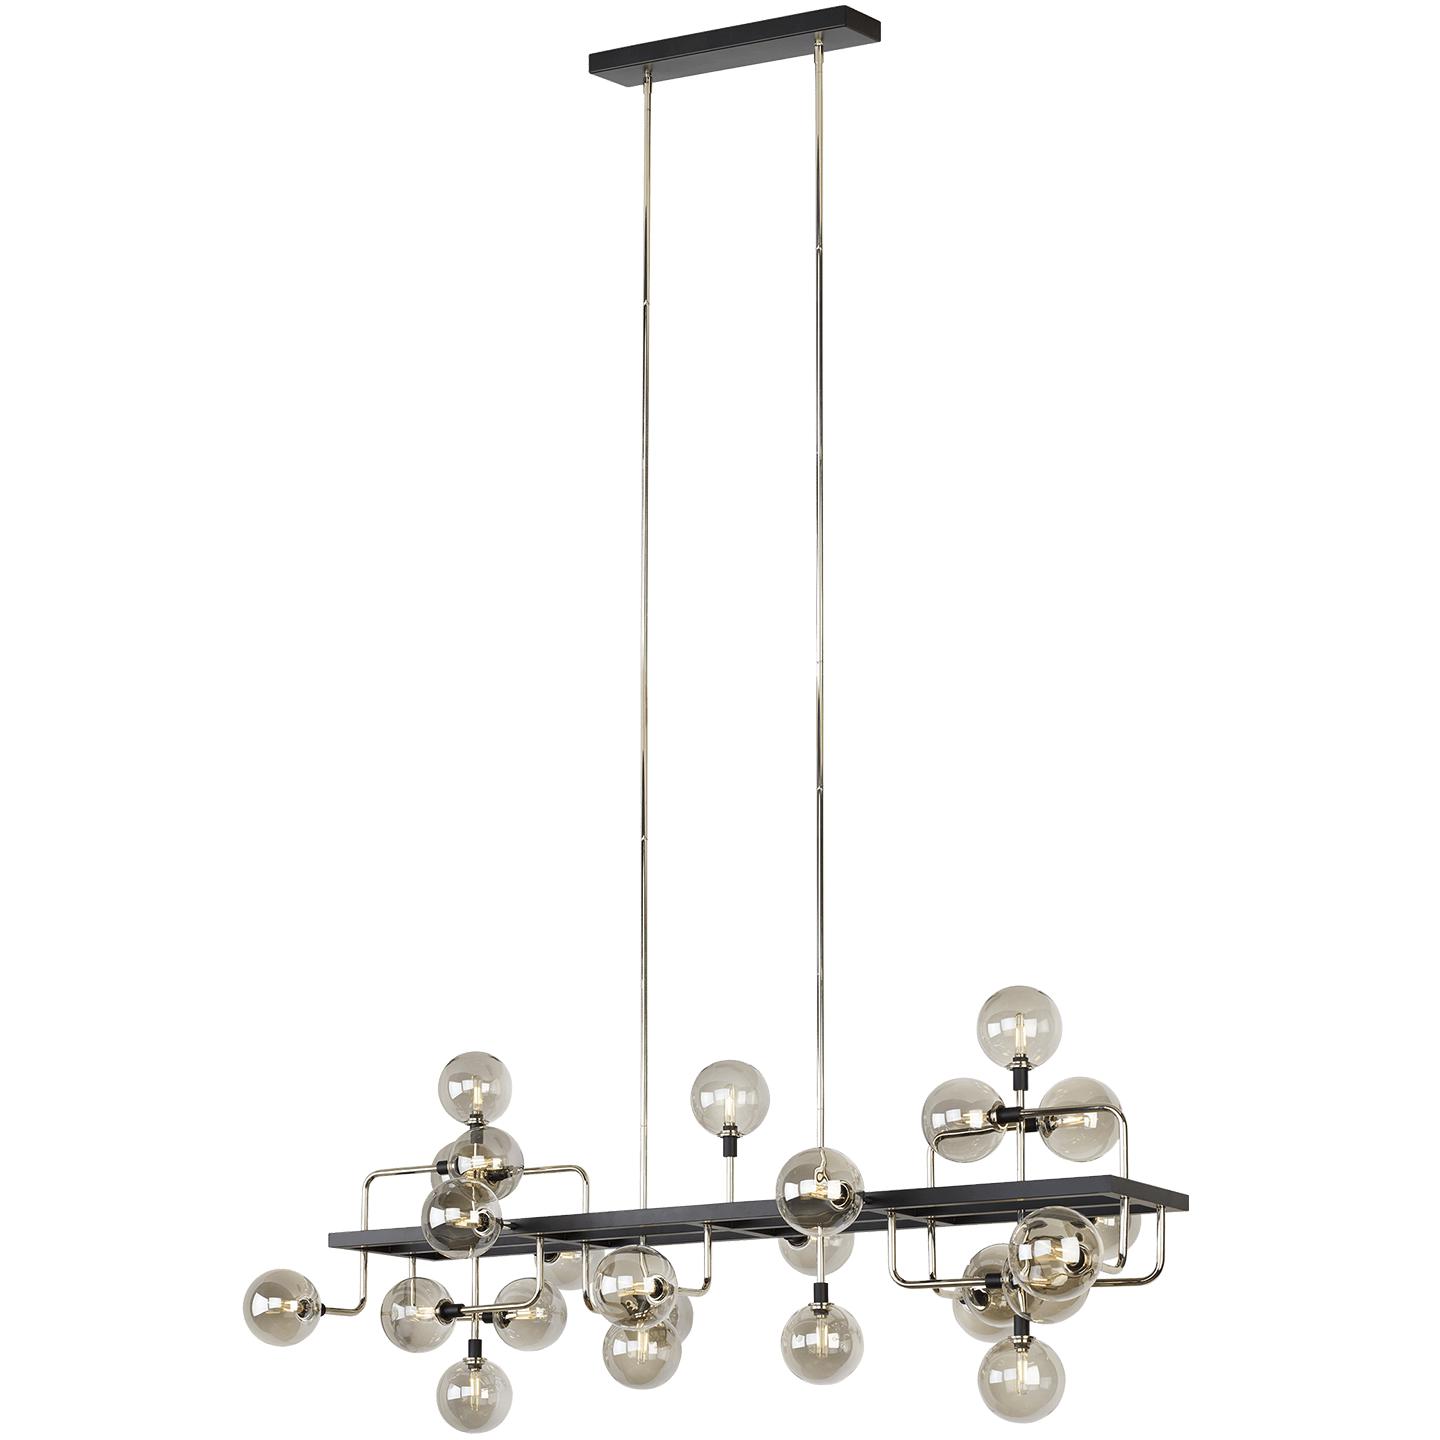 Smoke/Polished Nickel Lamp Not Included